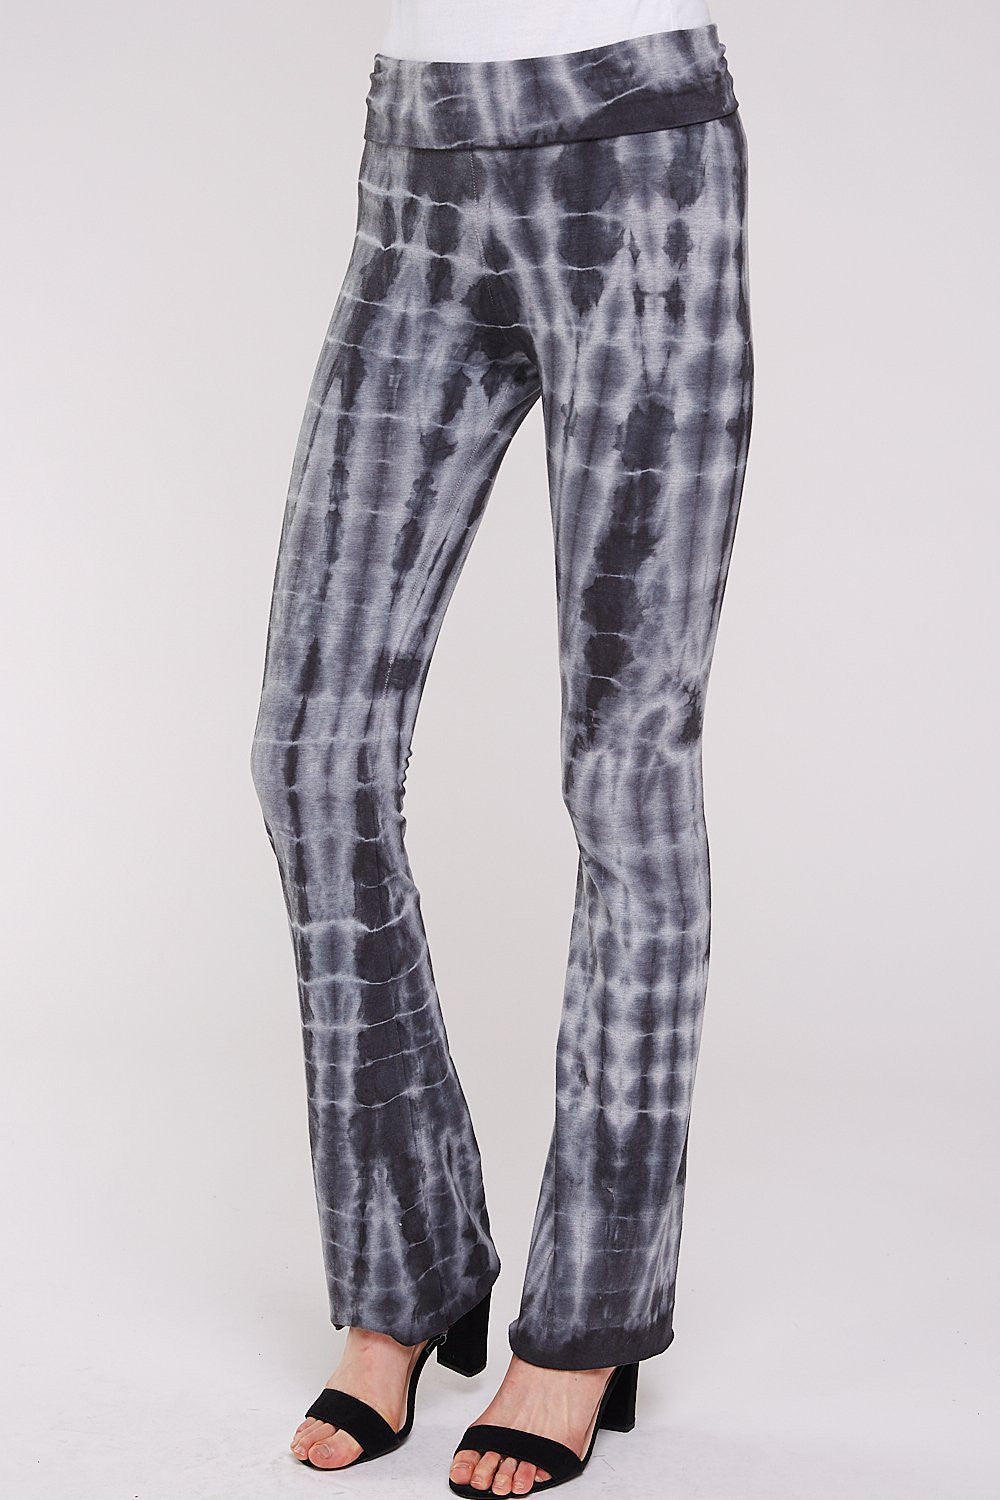 Front side  Black and Gray Bamboo tie dye Fold over Yoga Pant.